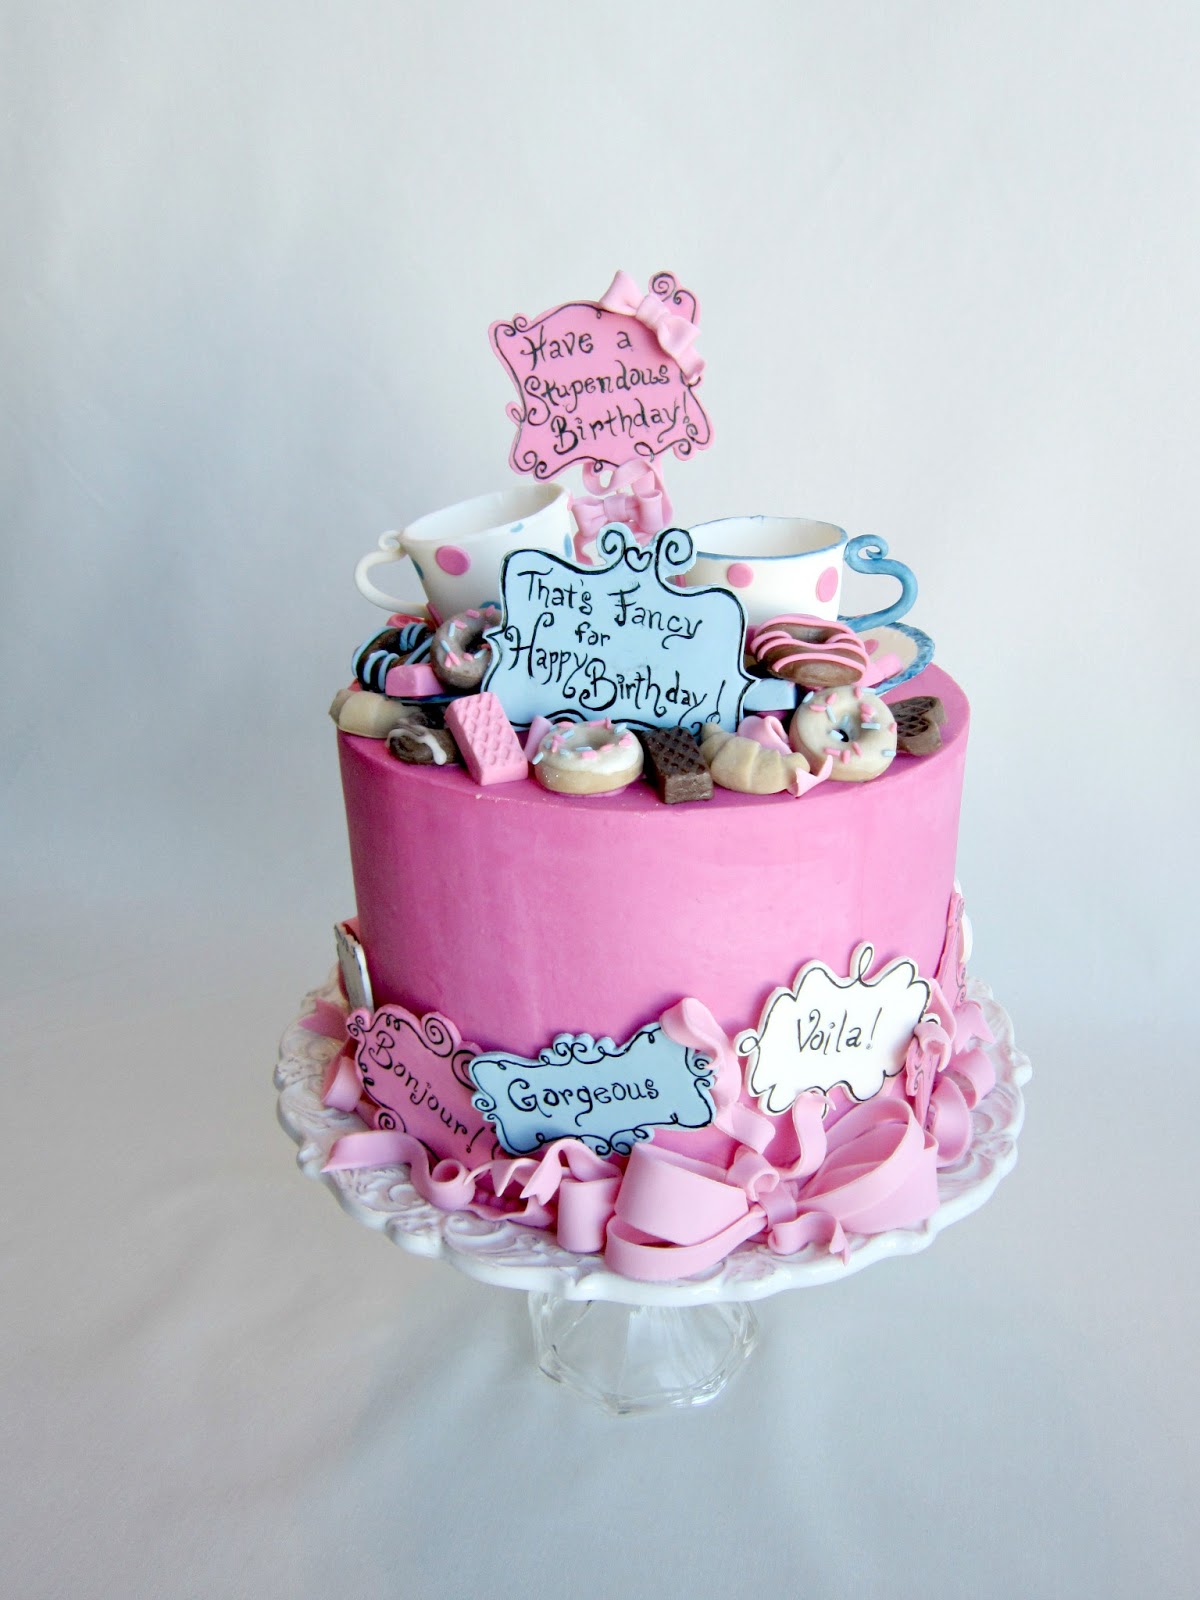 Delectable Cakes: Most Stupendous 'Fancy Nancy' Birthday Cake!